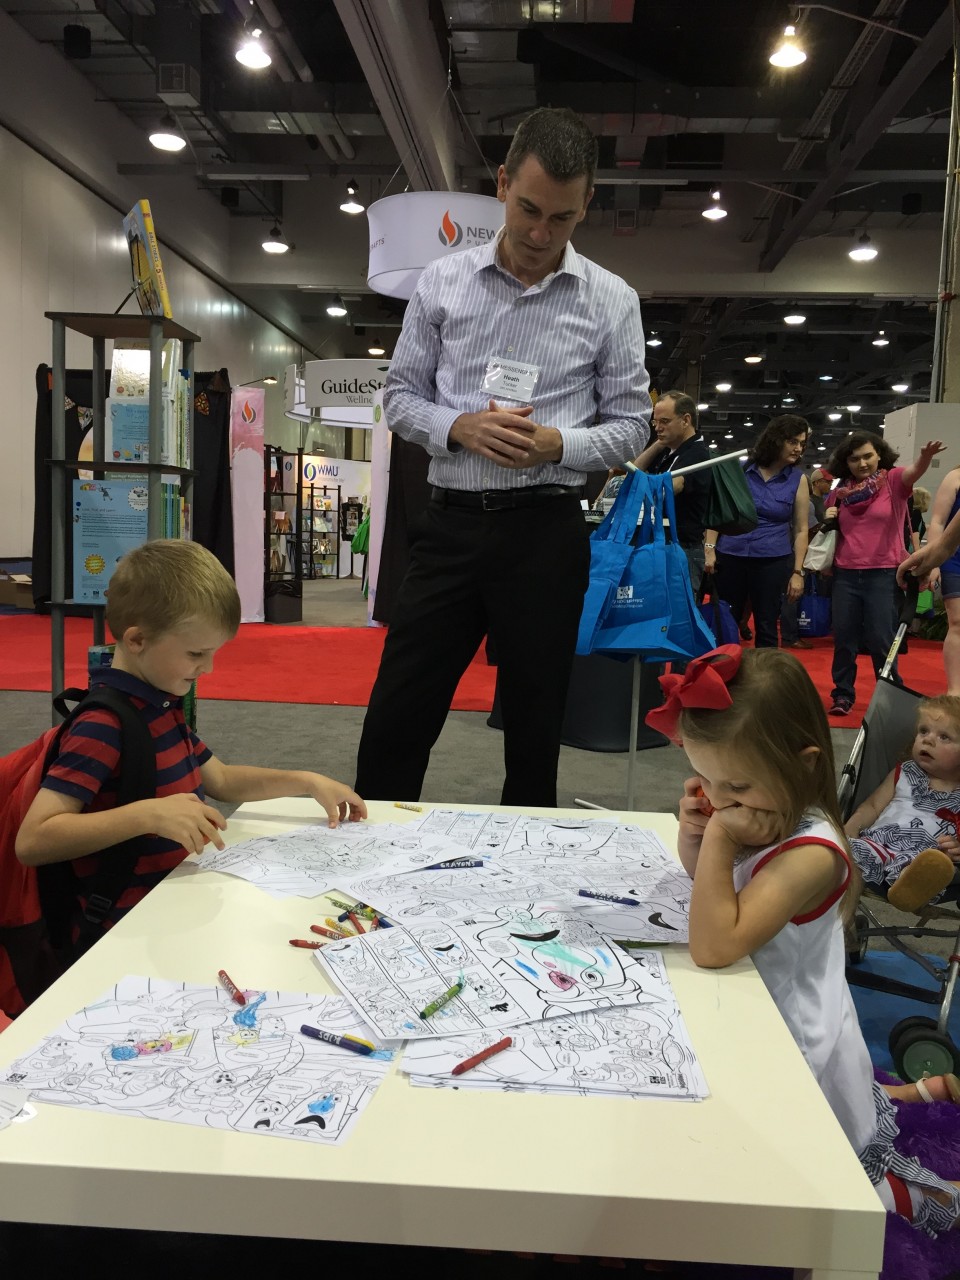 Brian Hobbs ‏@BrianGHobbs  · 7h7 hours ago   FBC Sentinel Pastor Heath Tucker and his children enjoy a kid-friendly exhibit from B&H publishers at the #sbc15